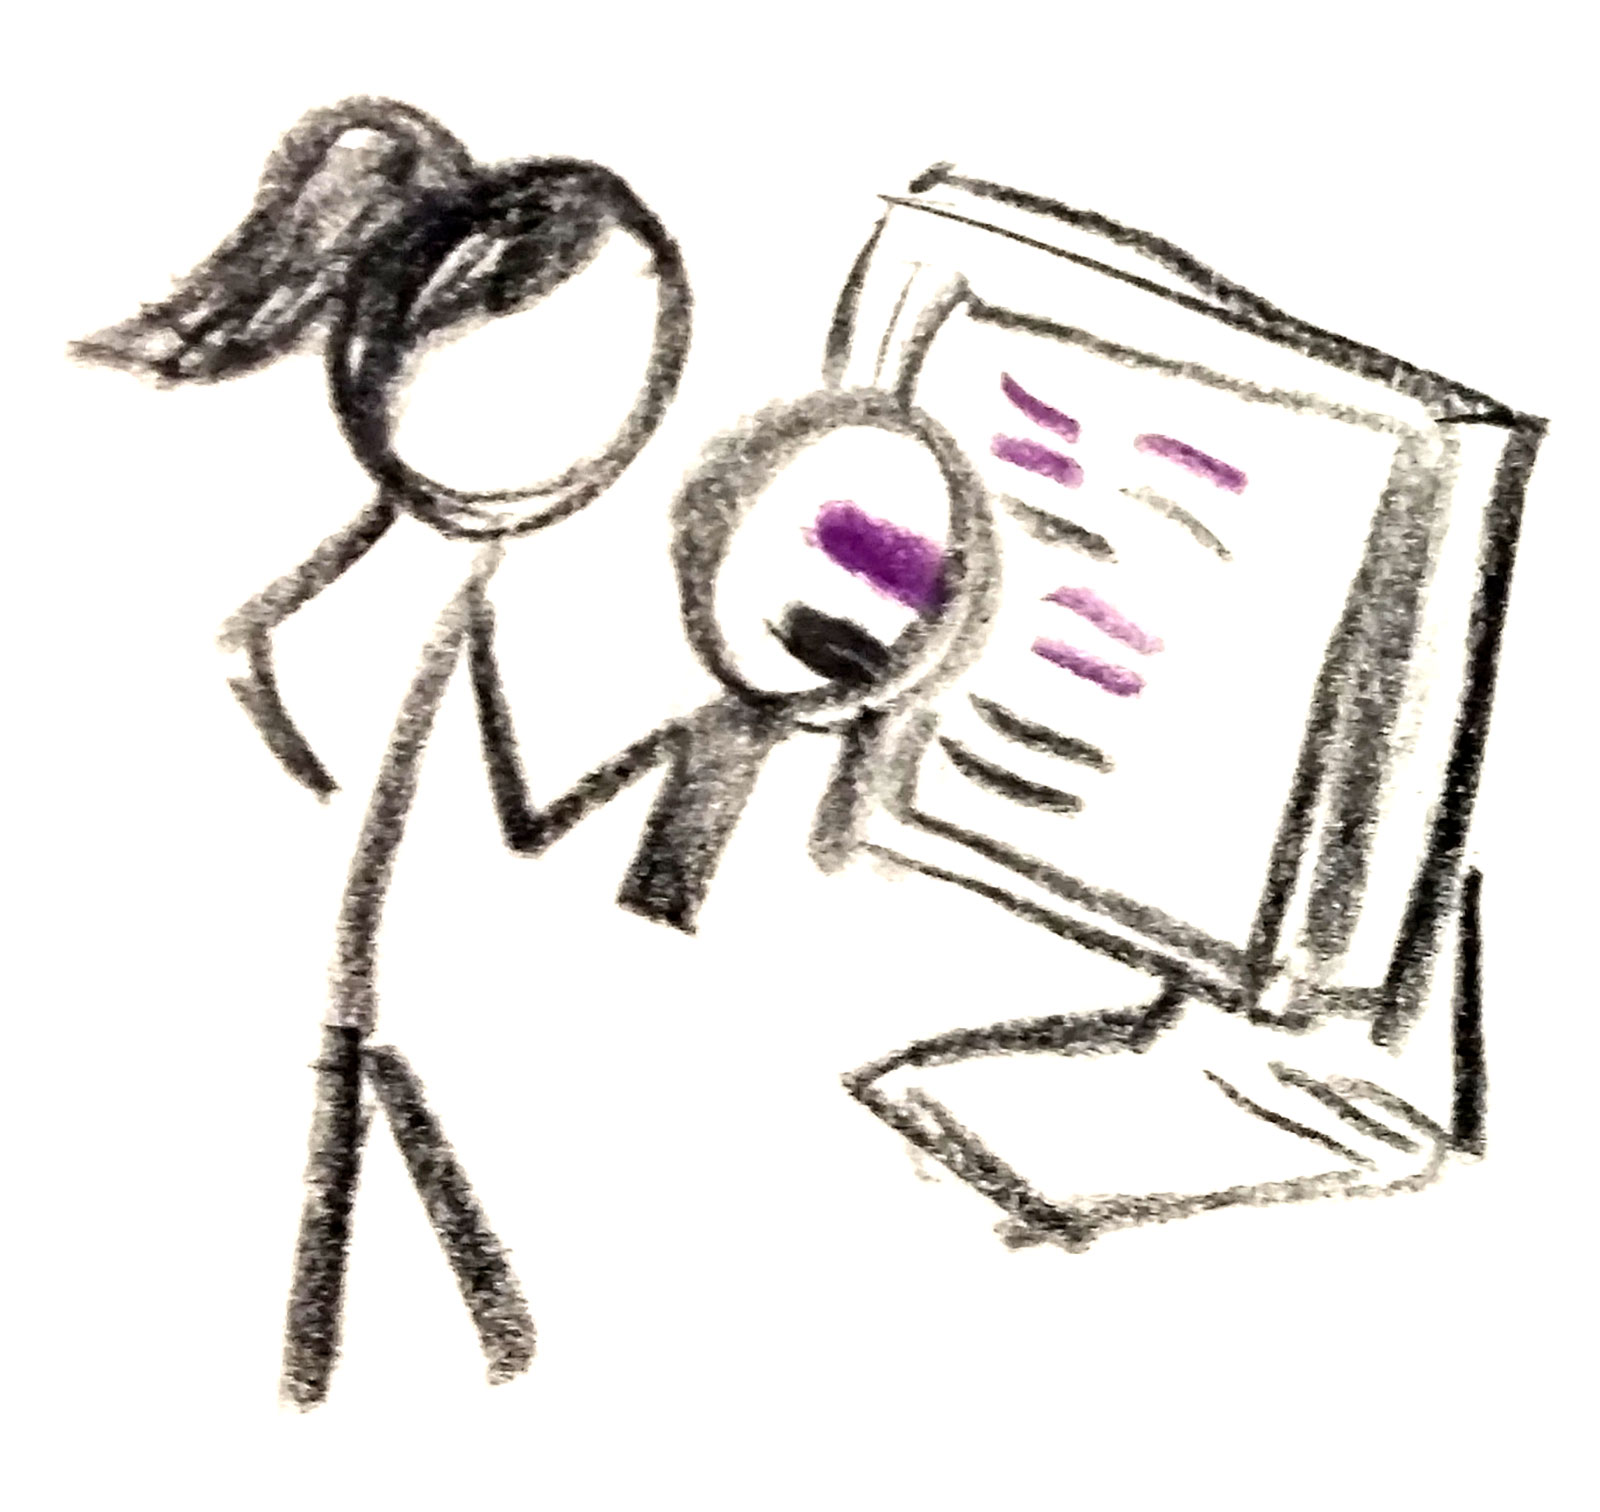 Stick figure looking at a website with a magnifying glass.